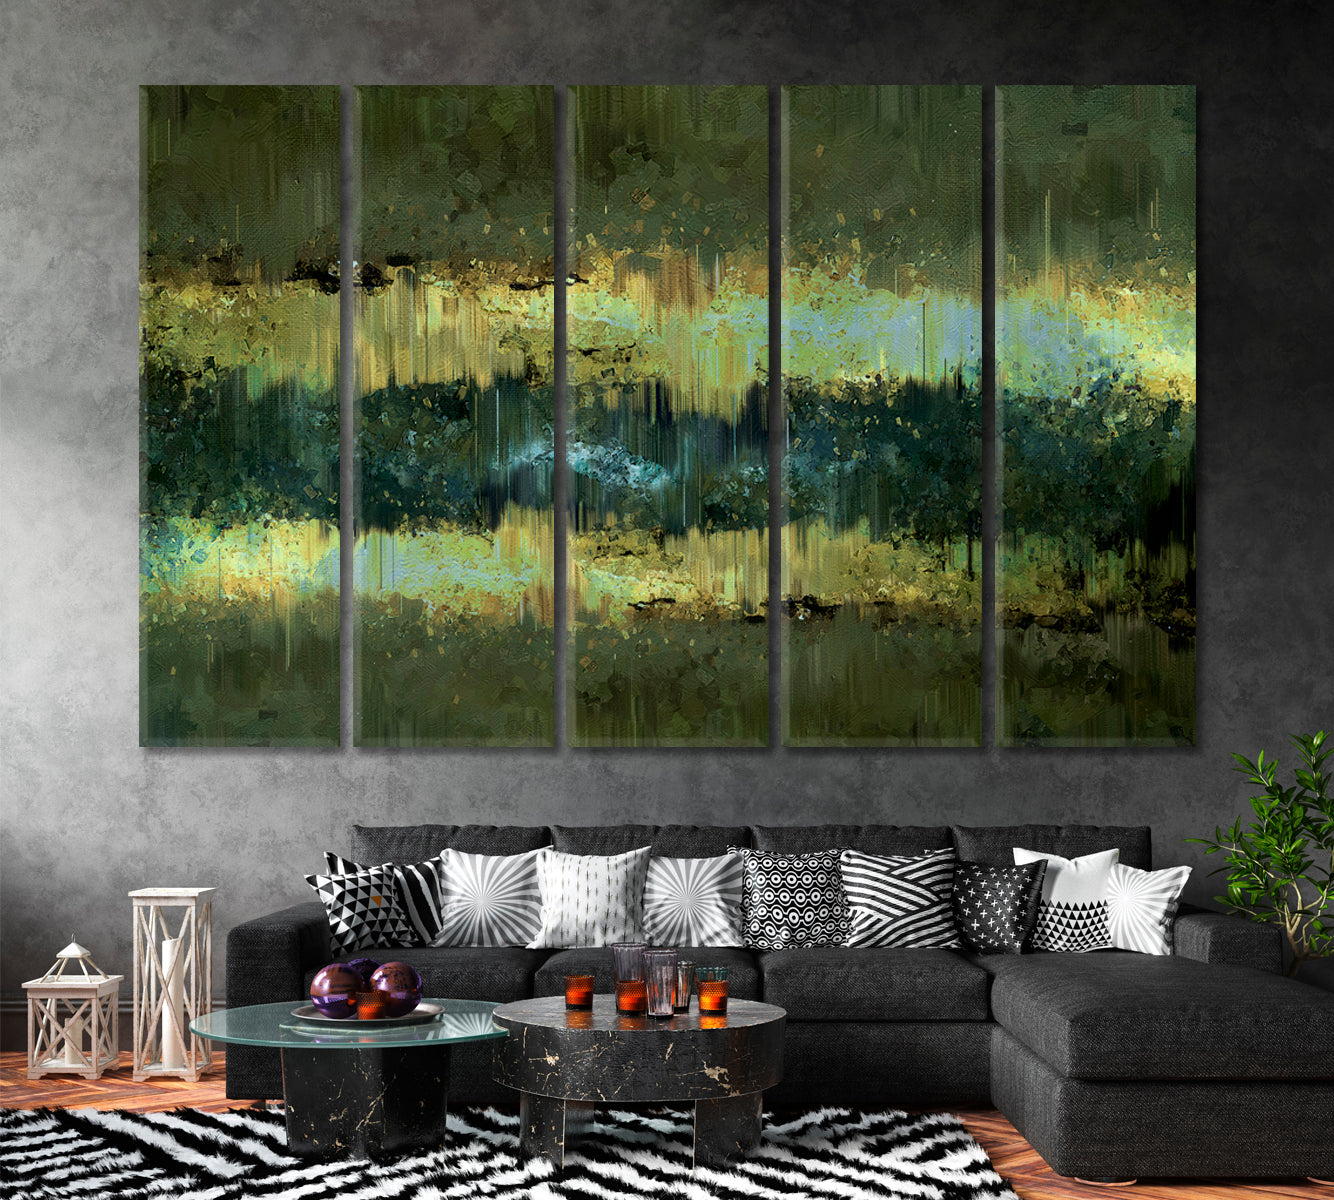 Abstract Grunge Landscape Expressionism Art Canvas Print ArtLexy 5 Panels 36"x24" inches 